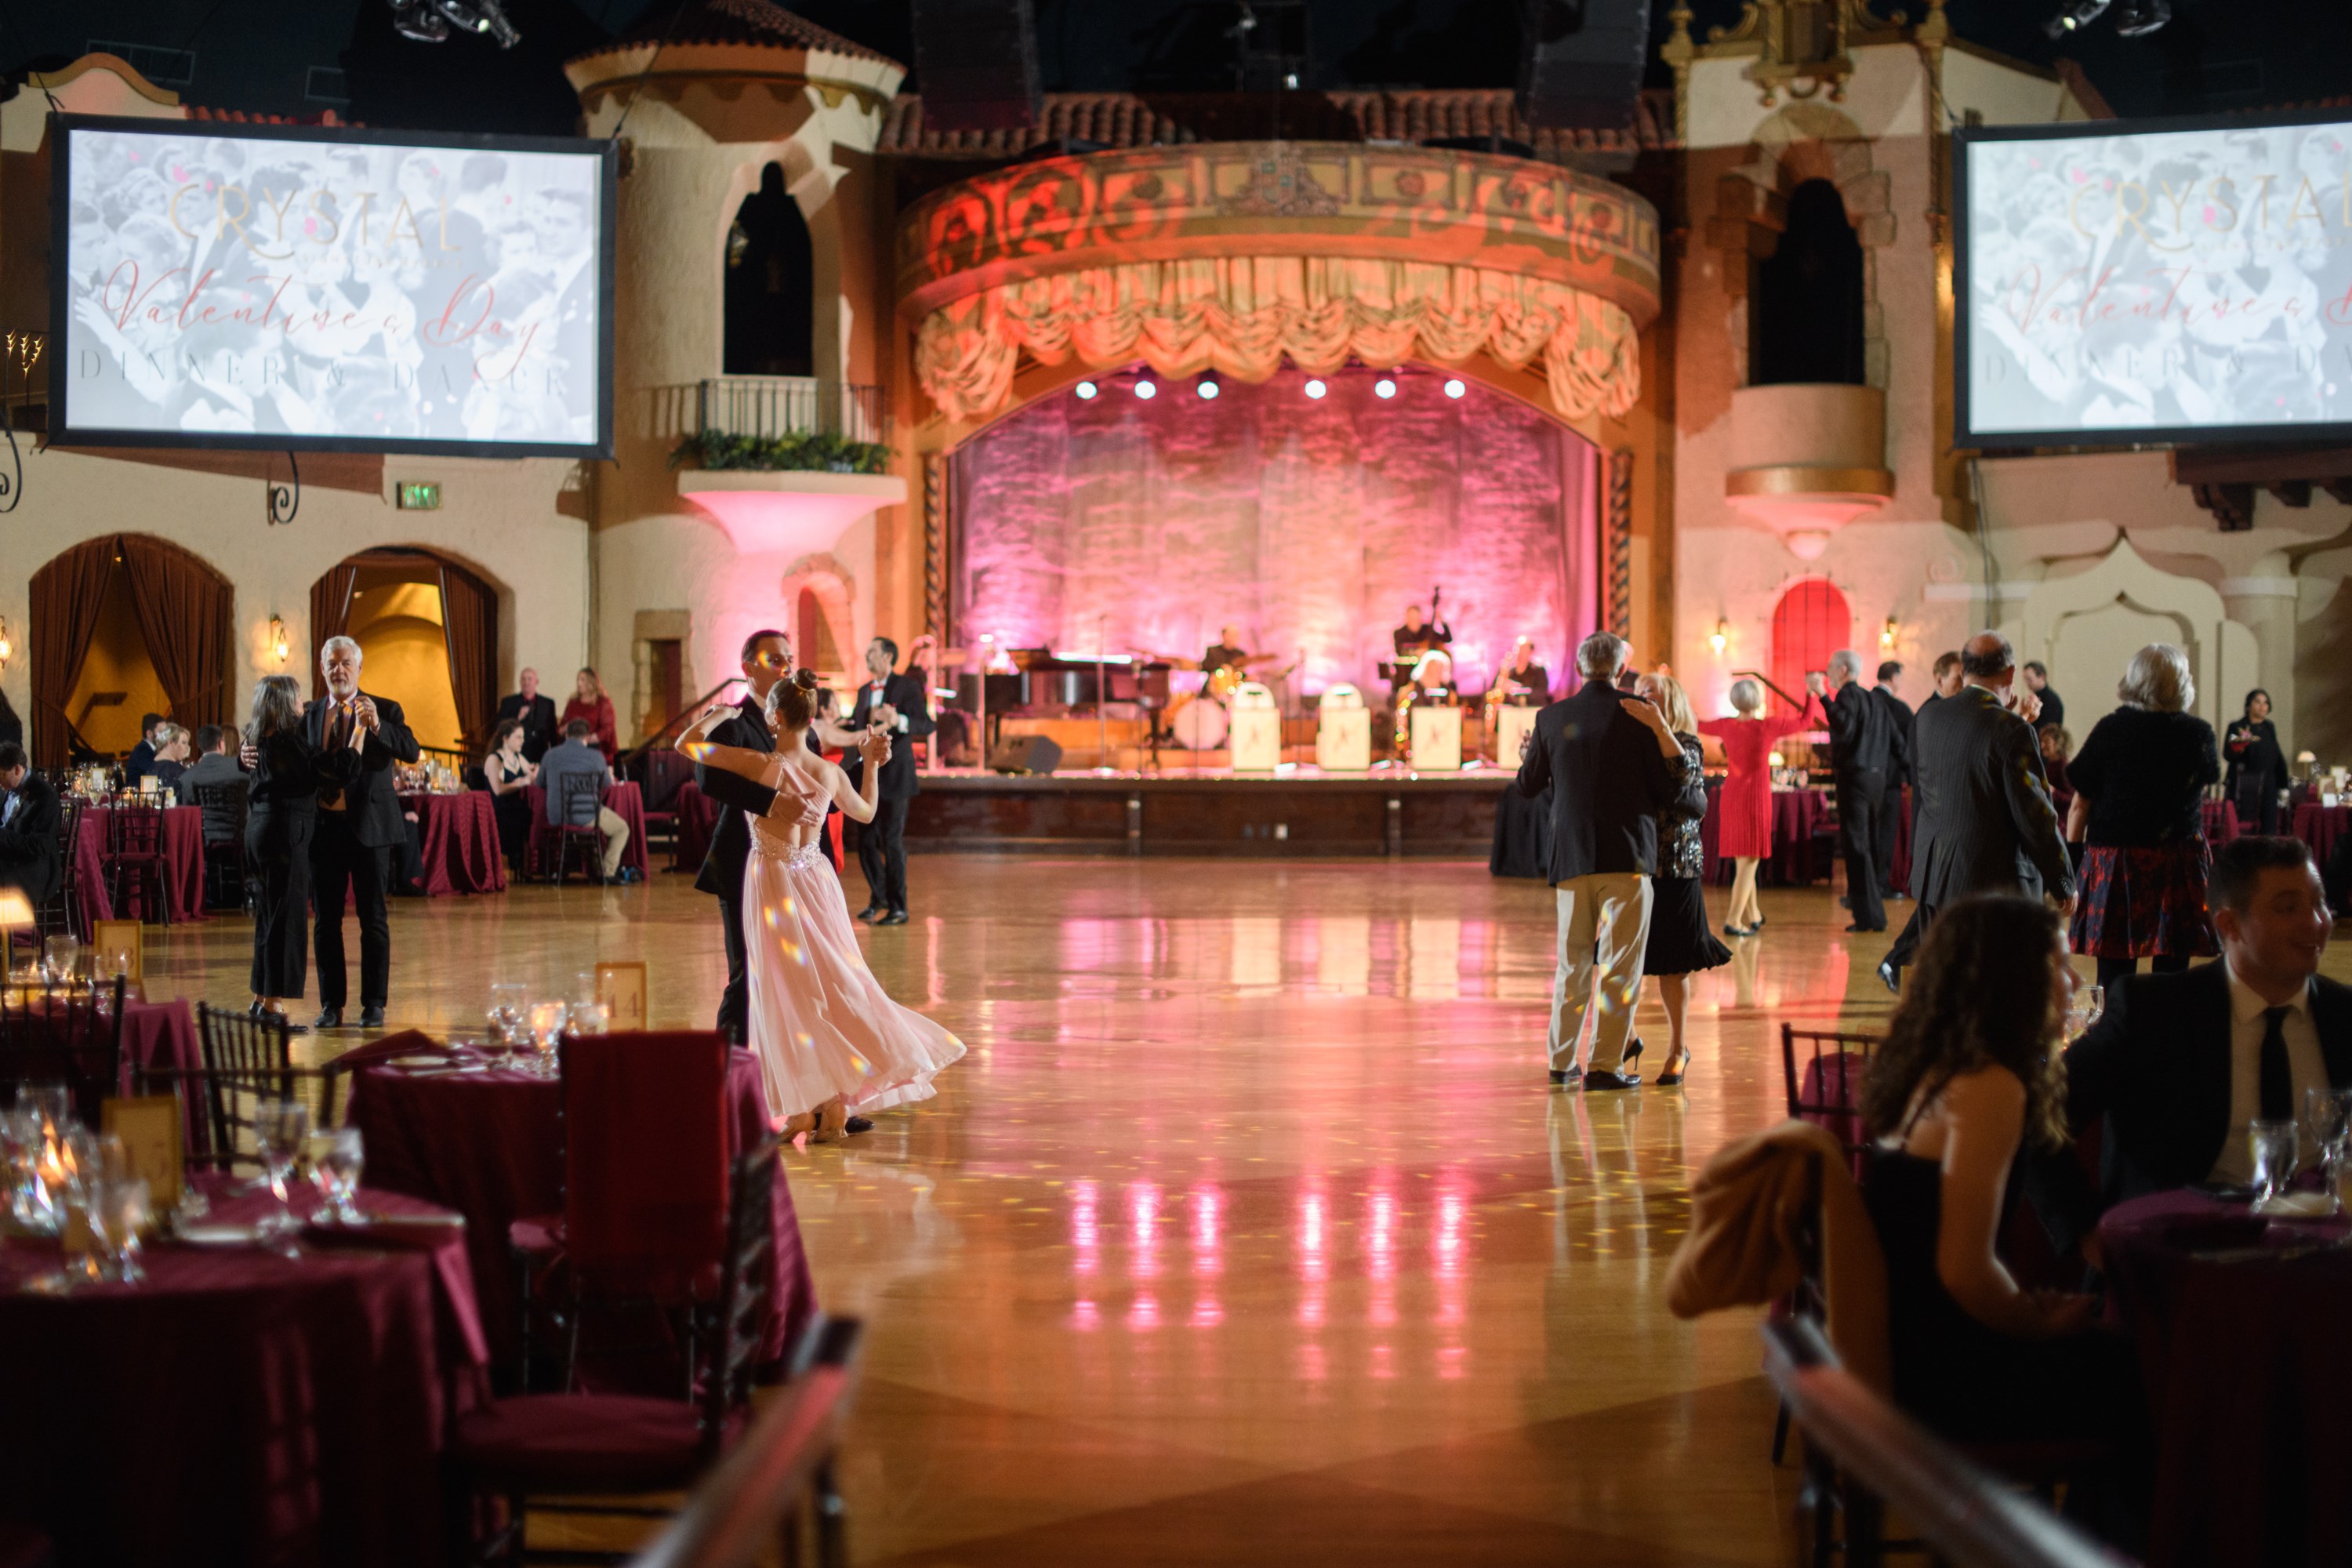 Special Event - Valentine’s Day Dance at the Indiana Roof Ballroom in Indianapolis